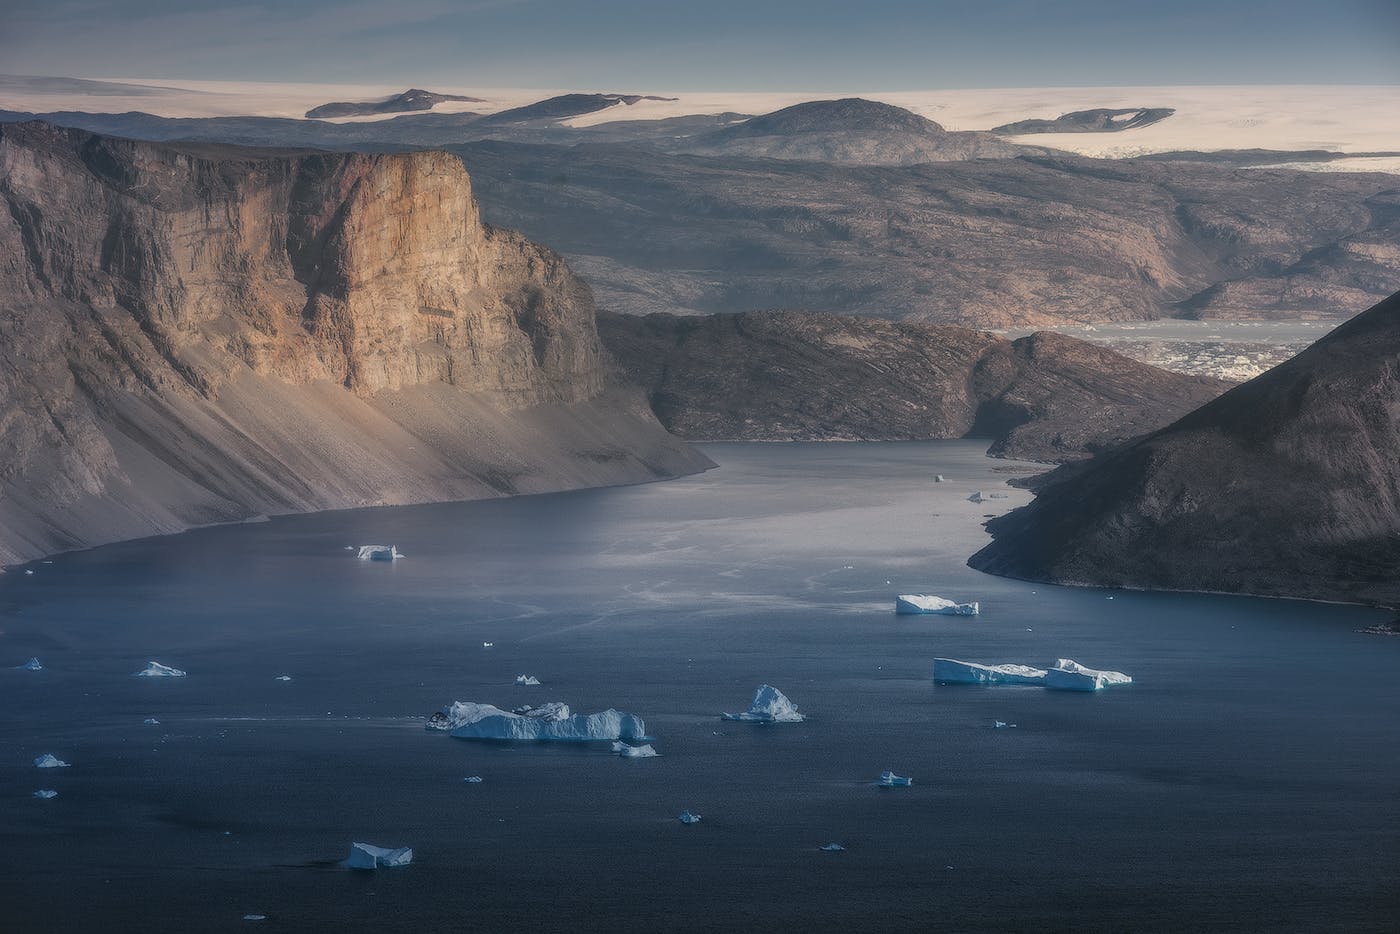 Epic 10 Day Greenland Sailing Trip & Photography Workshop with Transfer from Reykjavik - day 4